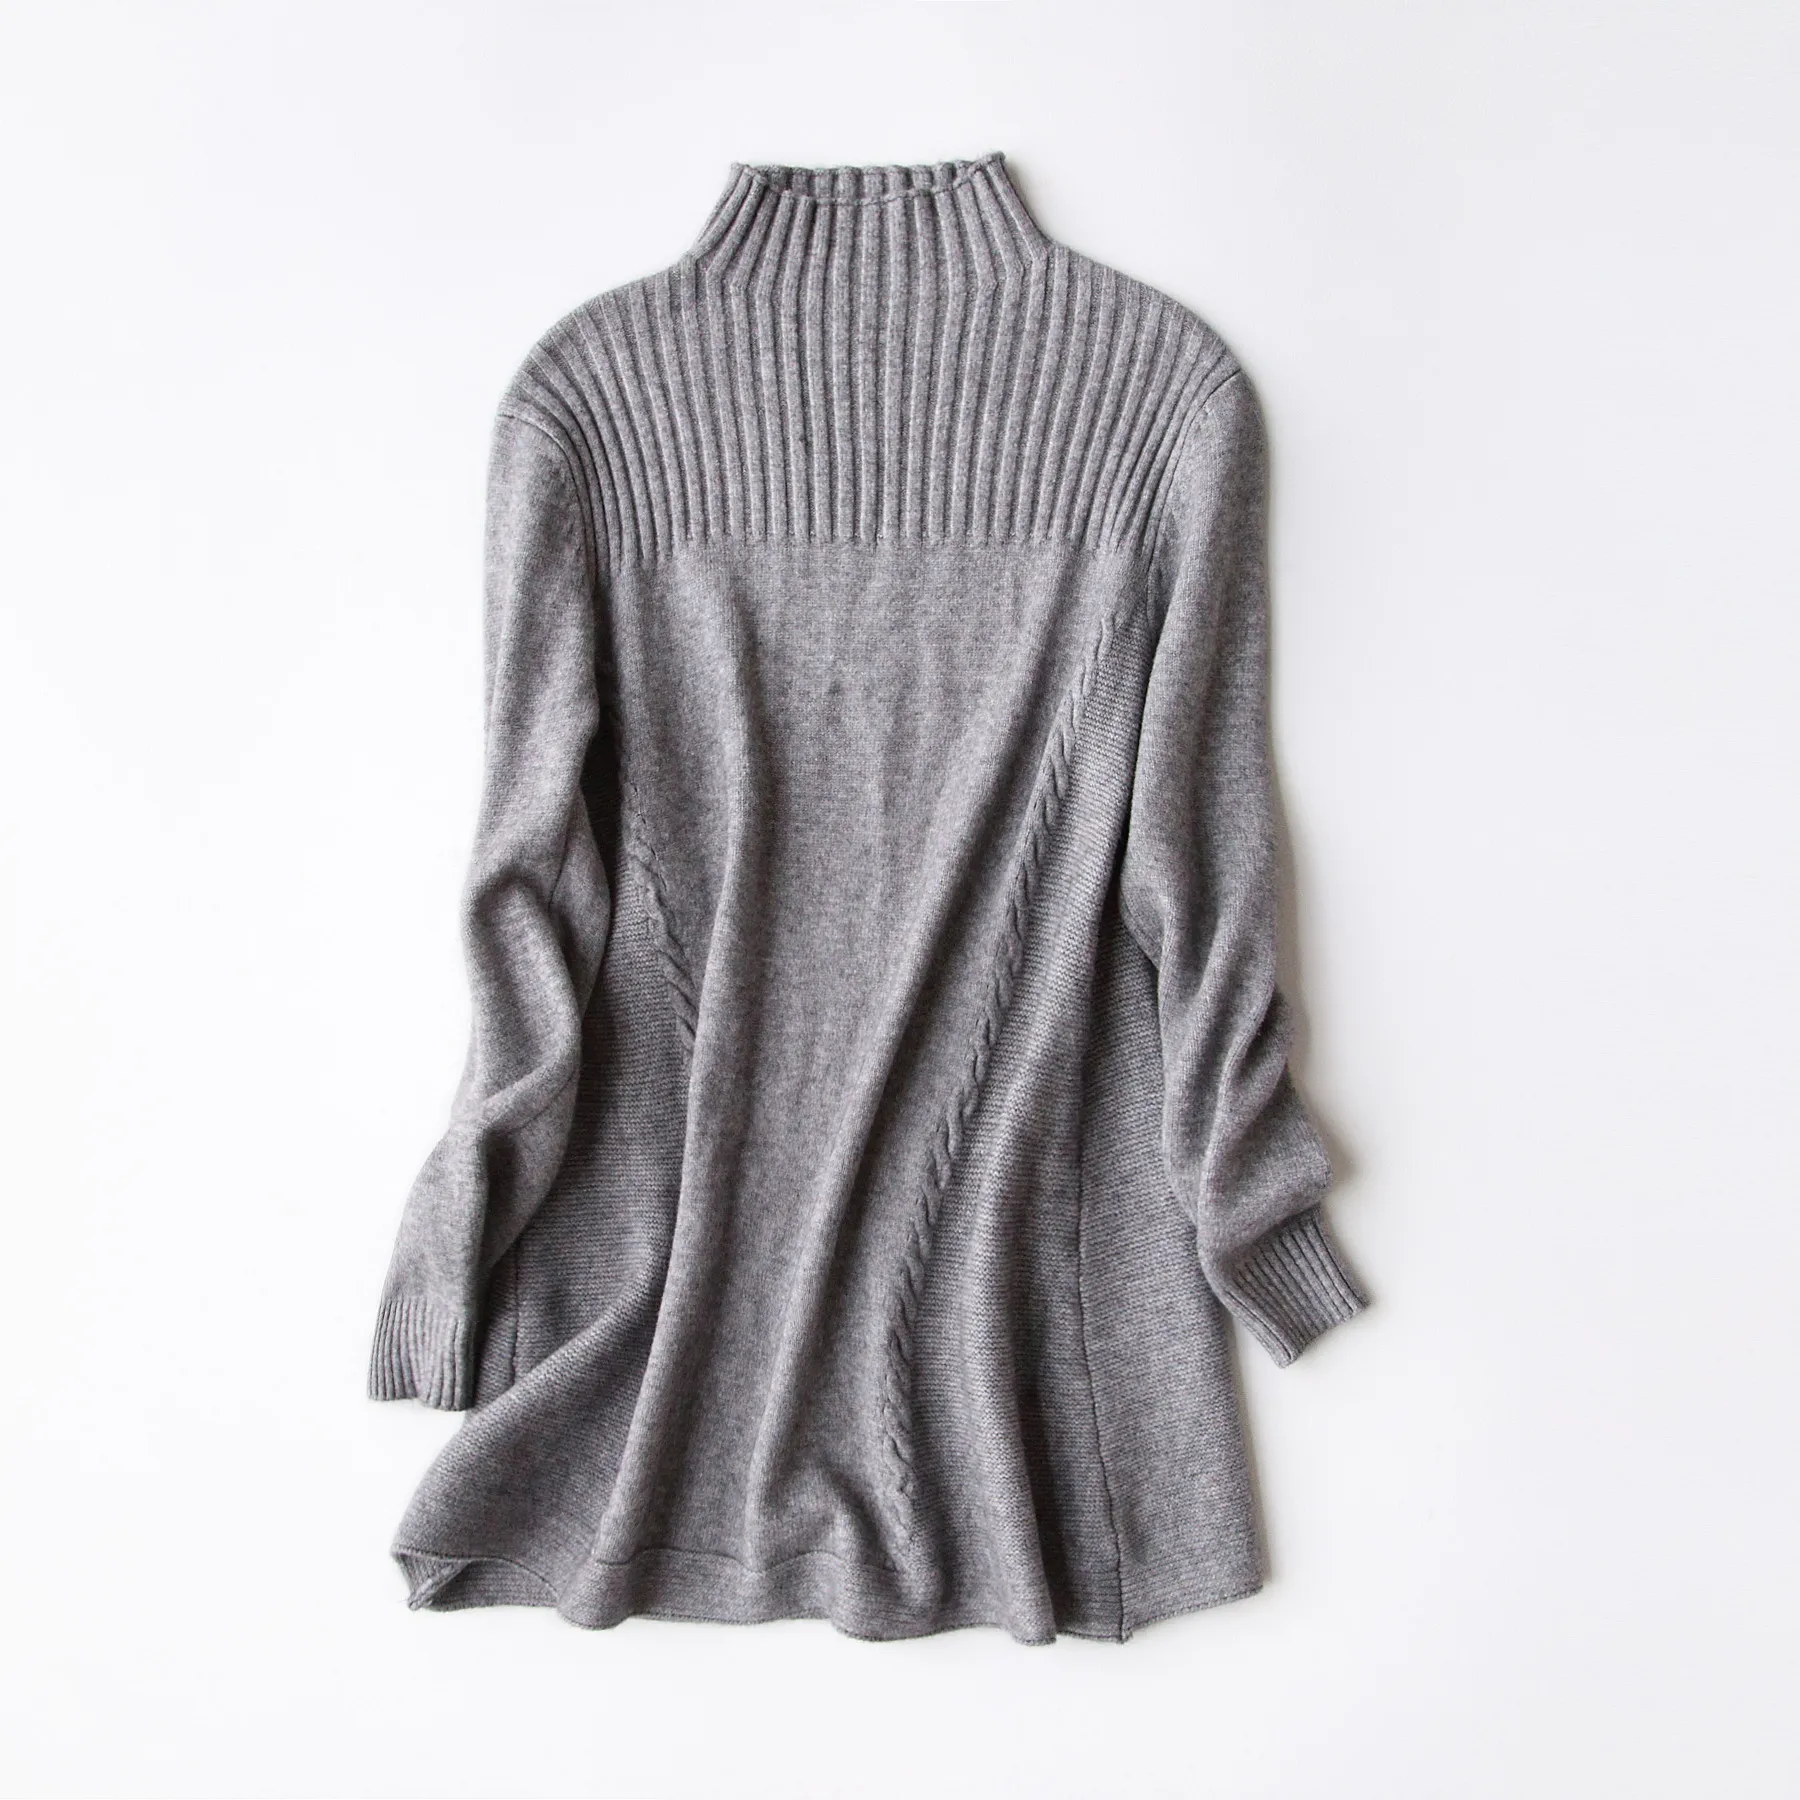 Autumn winter women Simple sweaters and Long Sleeve casual crop sweater slim solid knitted jumpers 8-7768 | Женская одежда